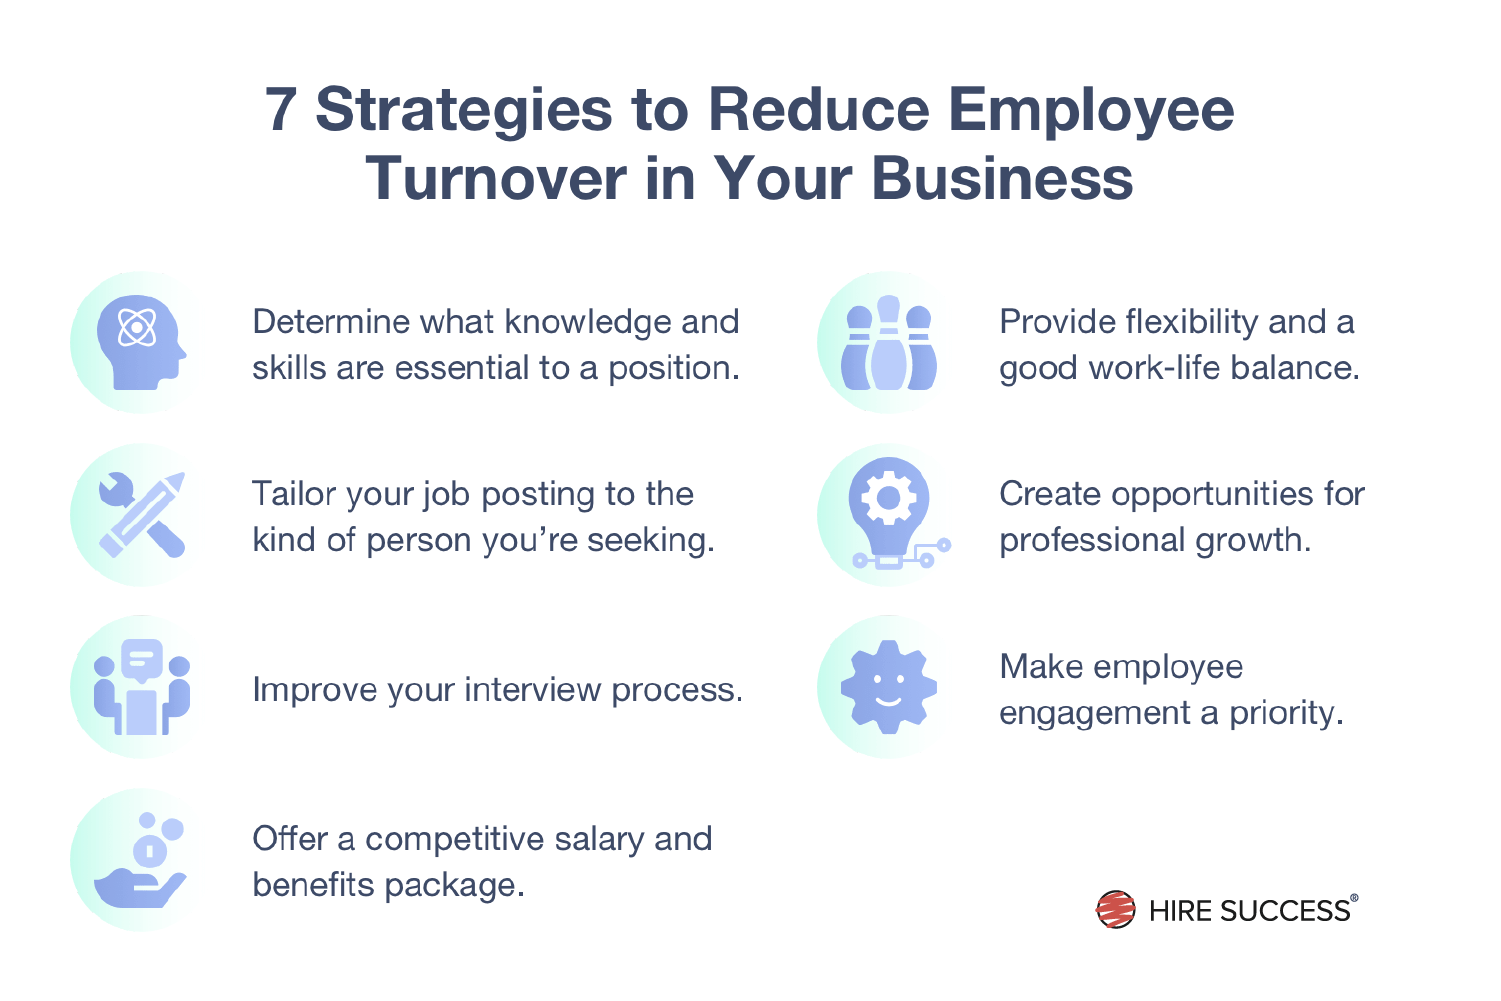 7 strategies to reduce employee turnover in your business